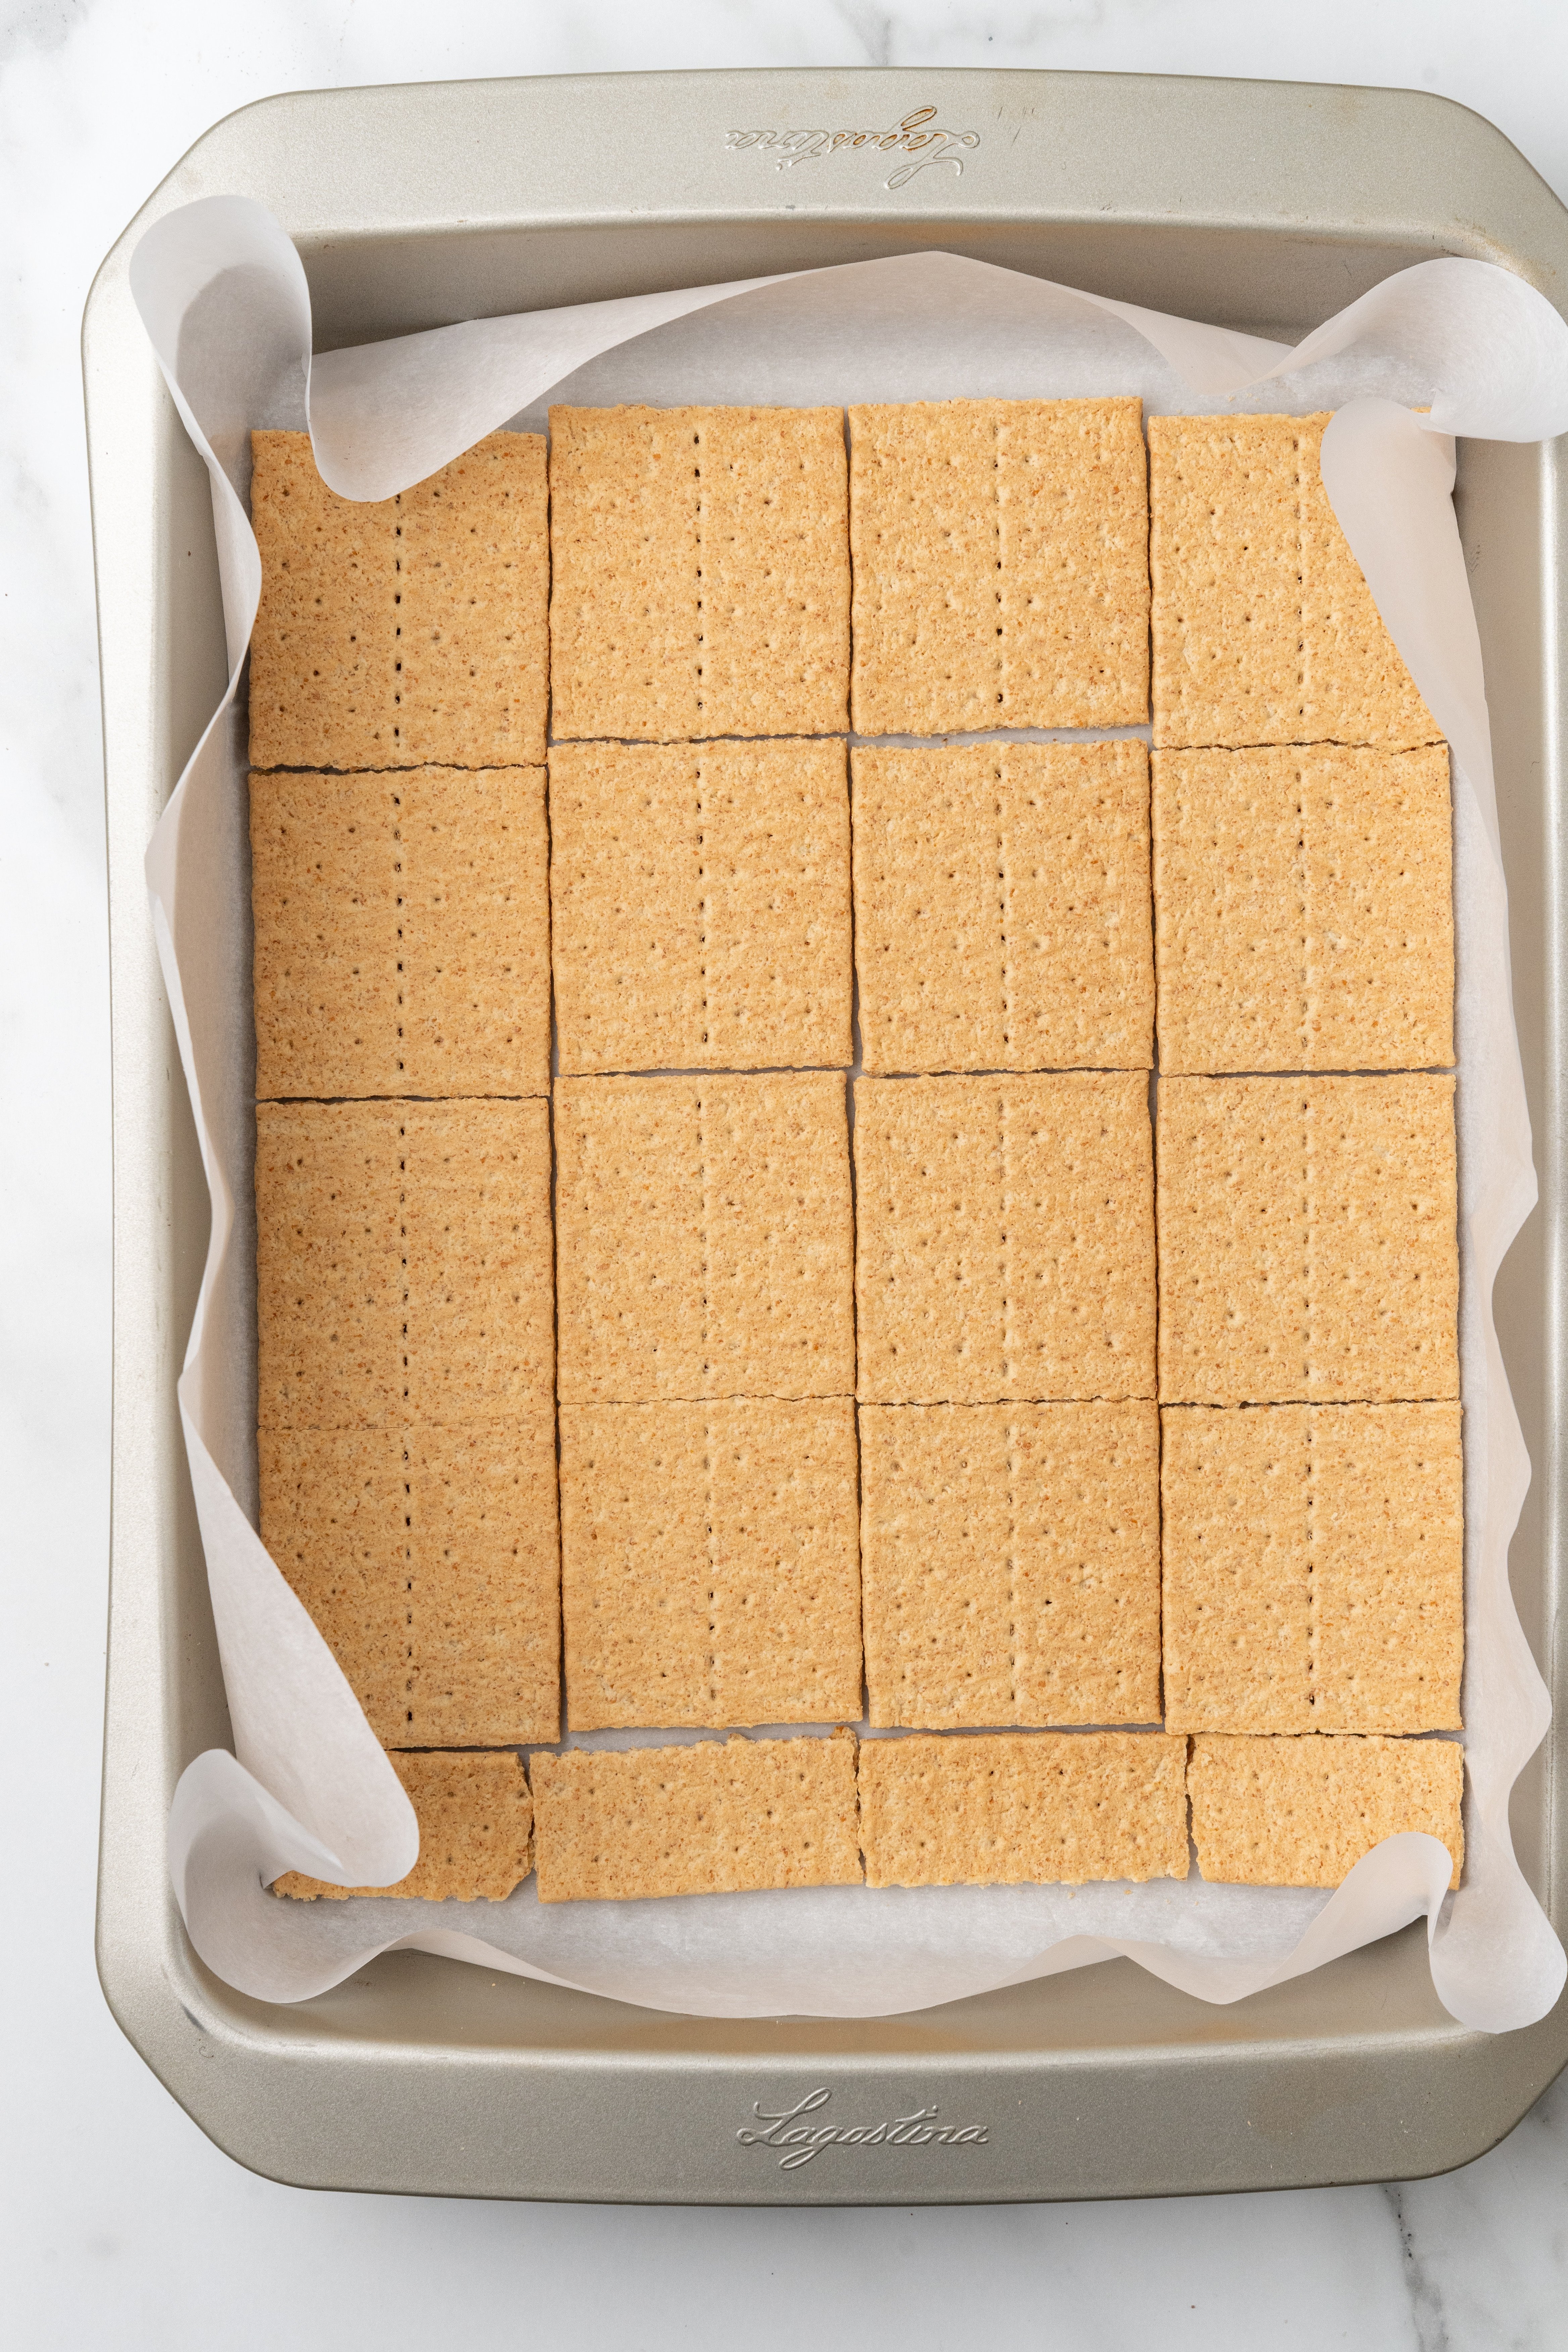 graham cracker squares arranged in the bottom of a parchment paper lined baking pan